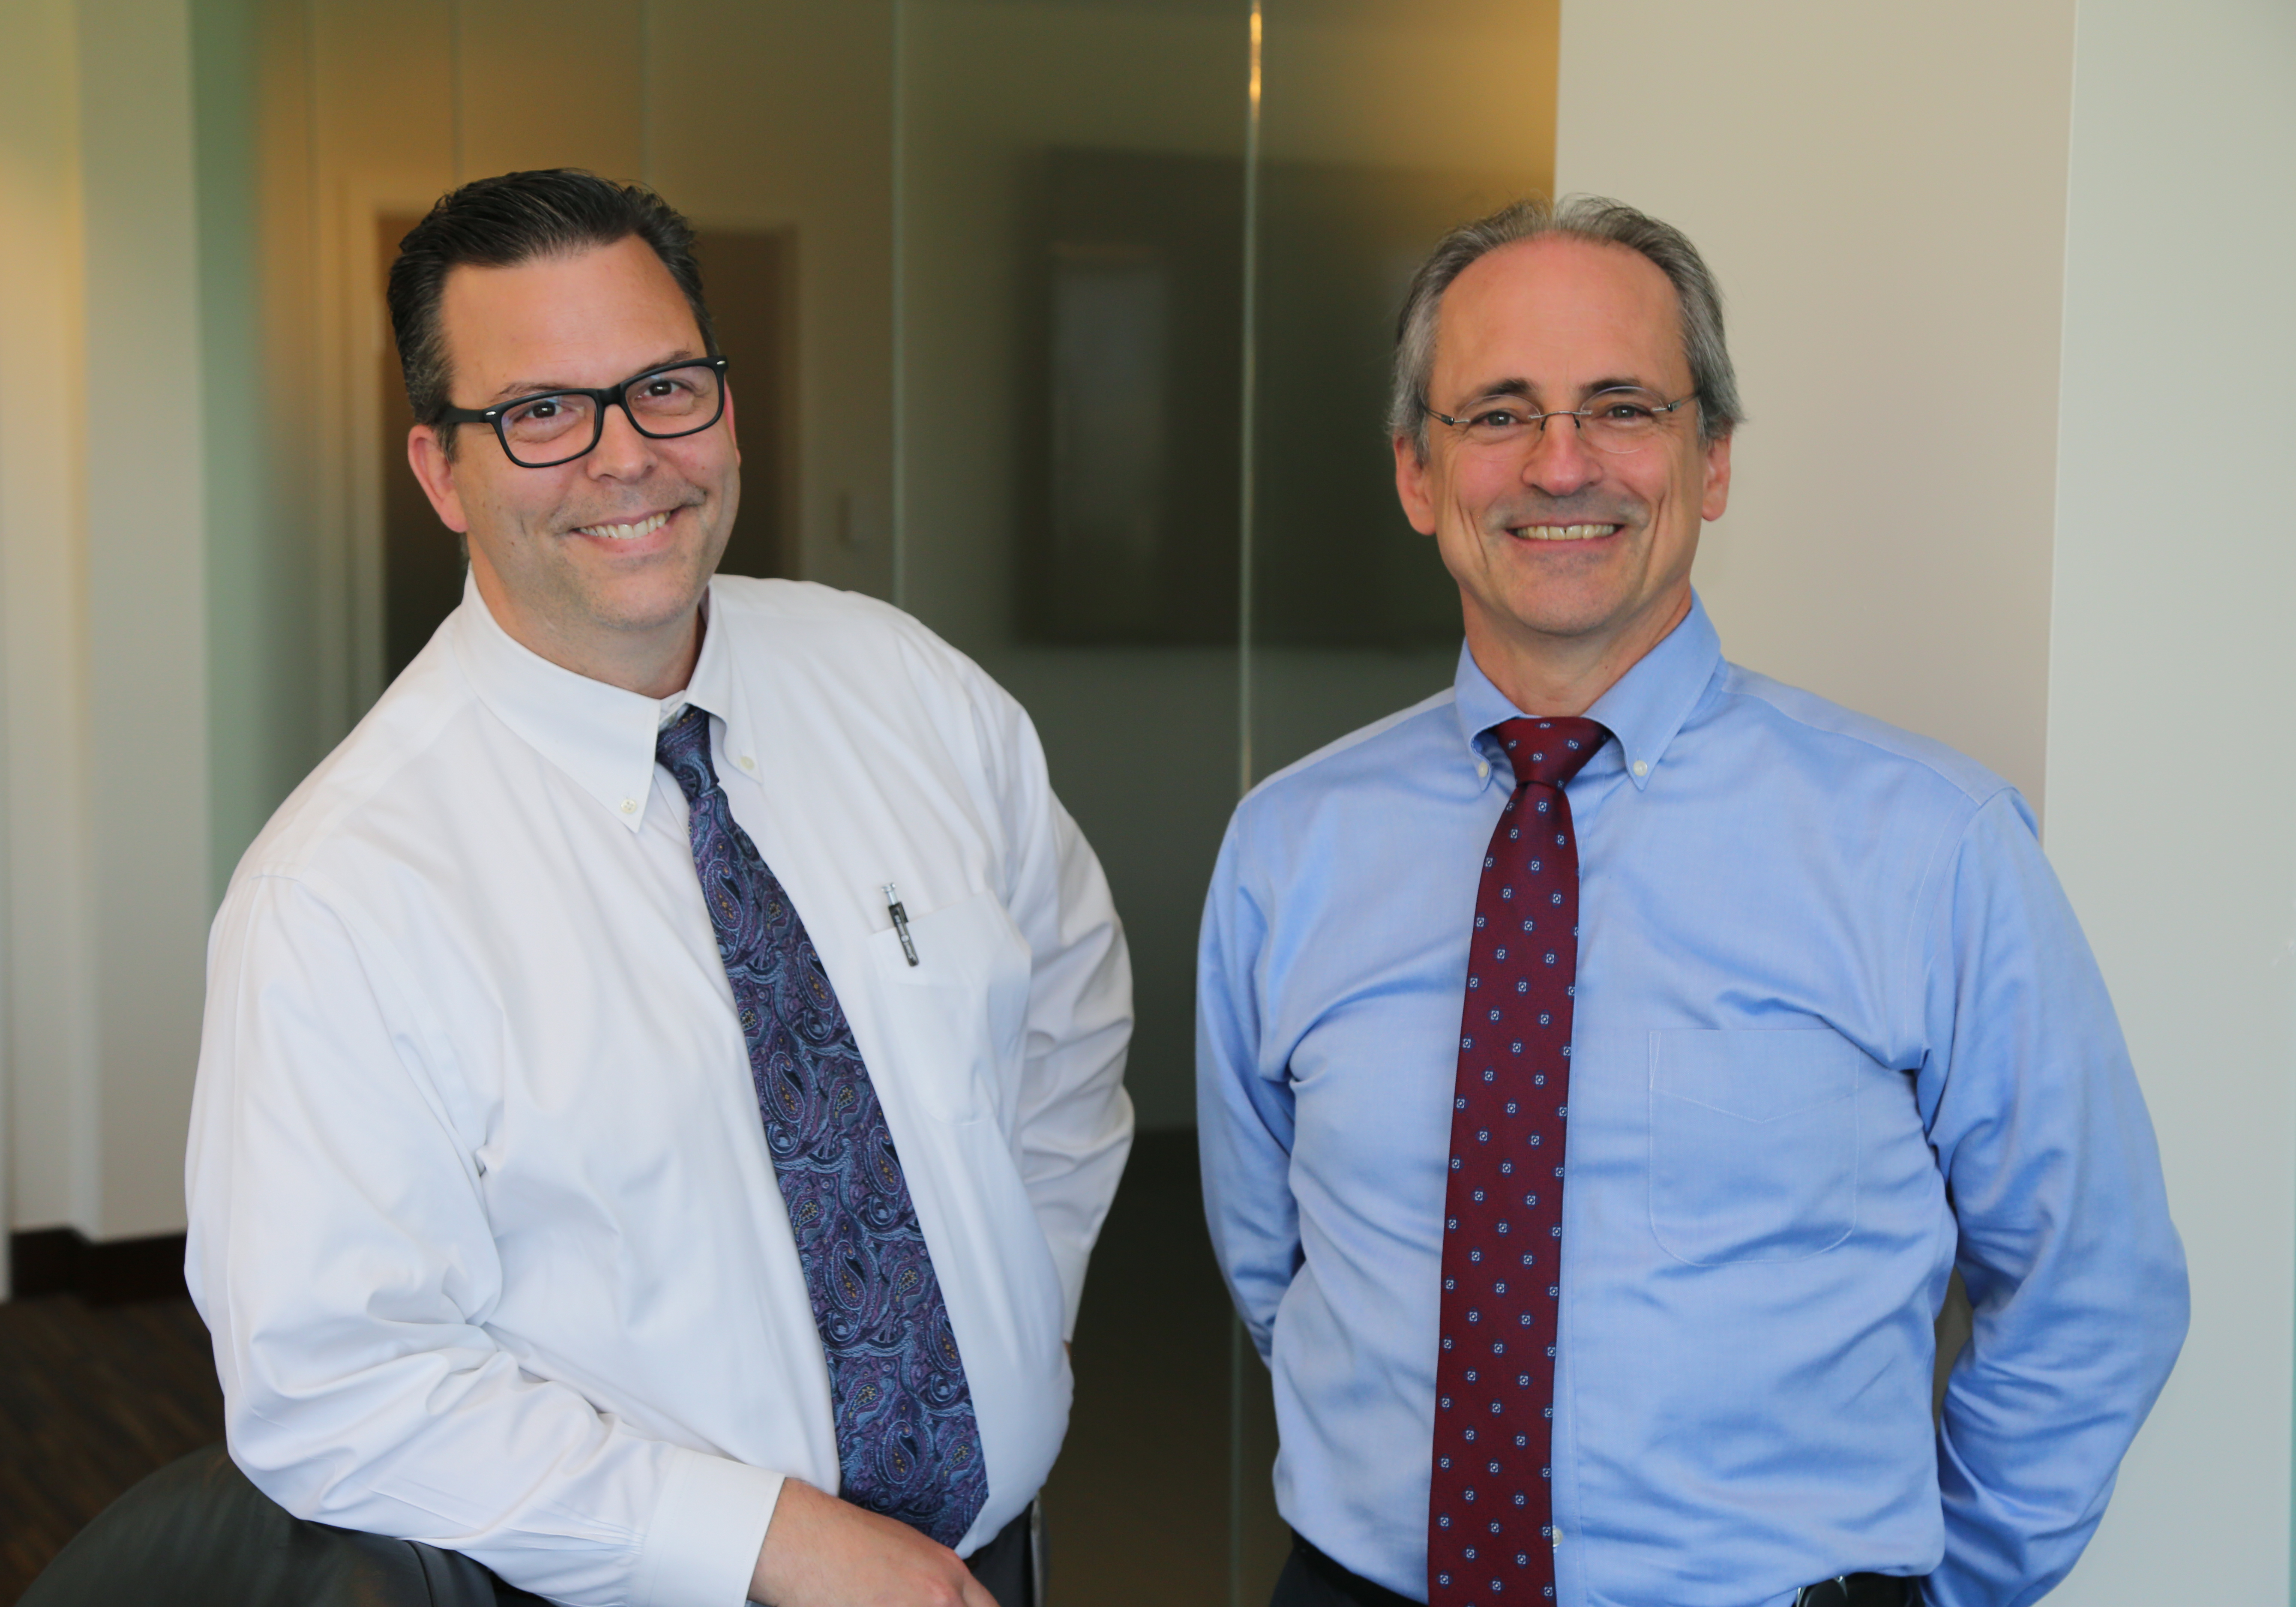 Jonathan Gates, MD and Andrew Saal, MD, MPH